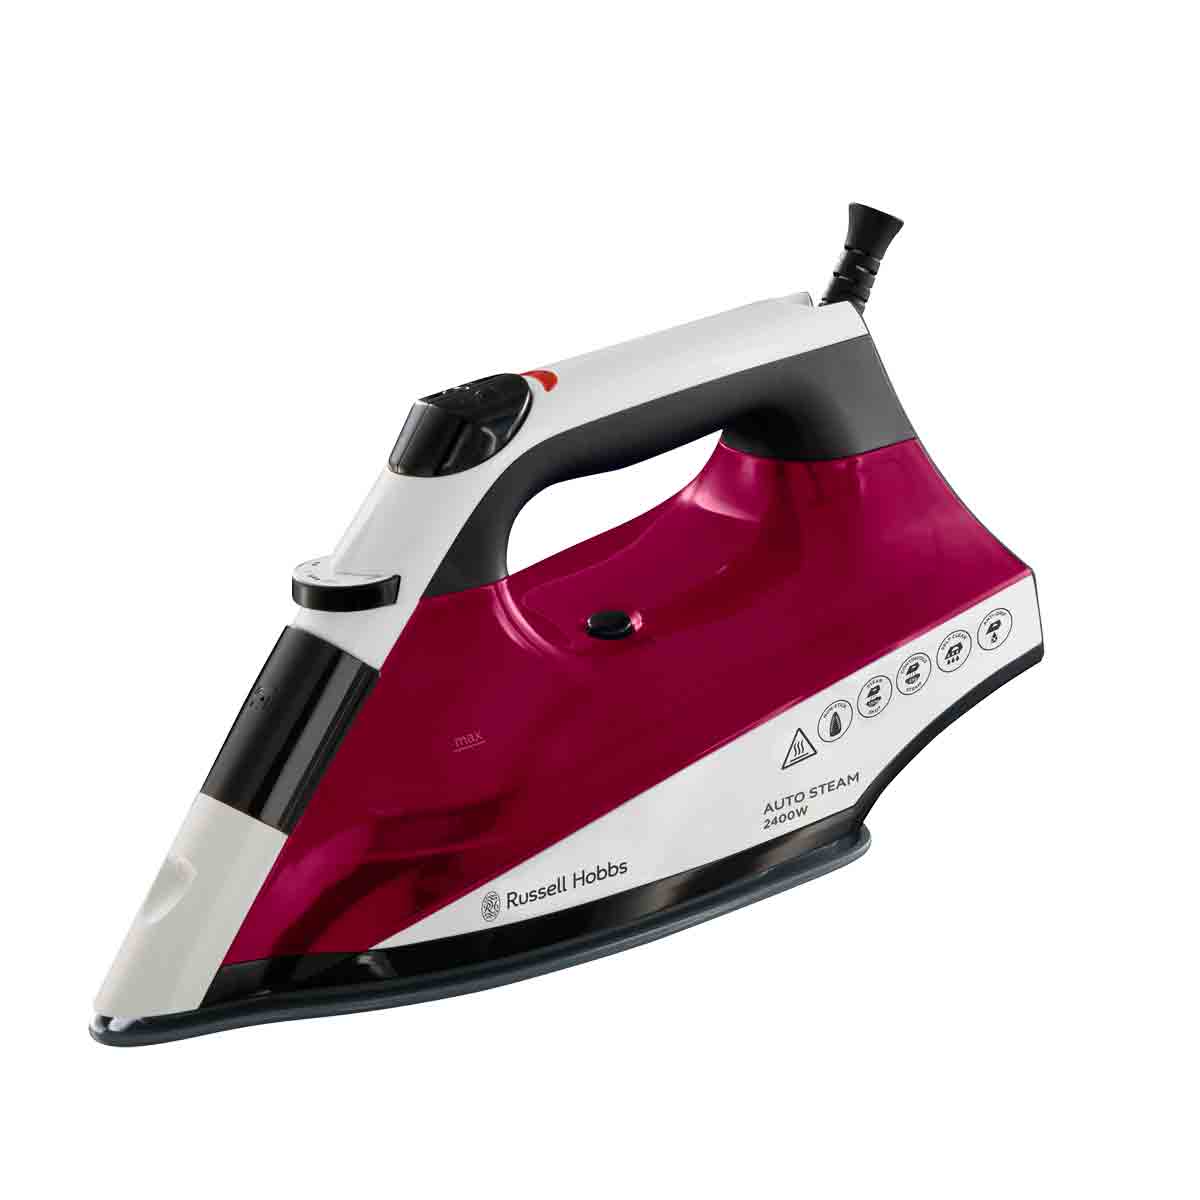 Russell Hobbs 22520 2400W Auto Steam Iron - Red